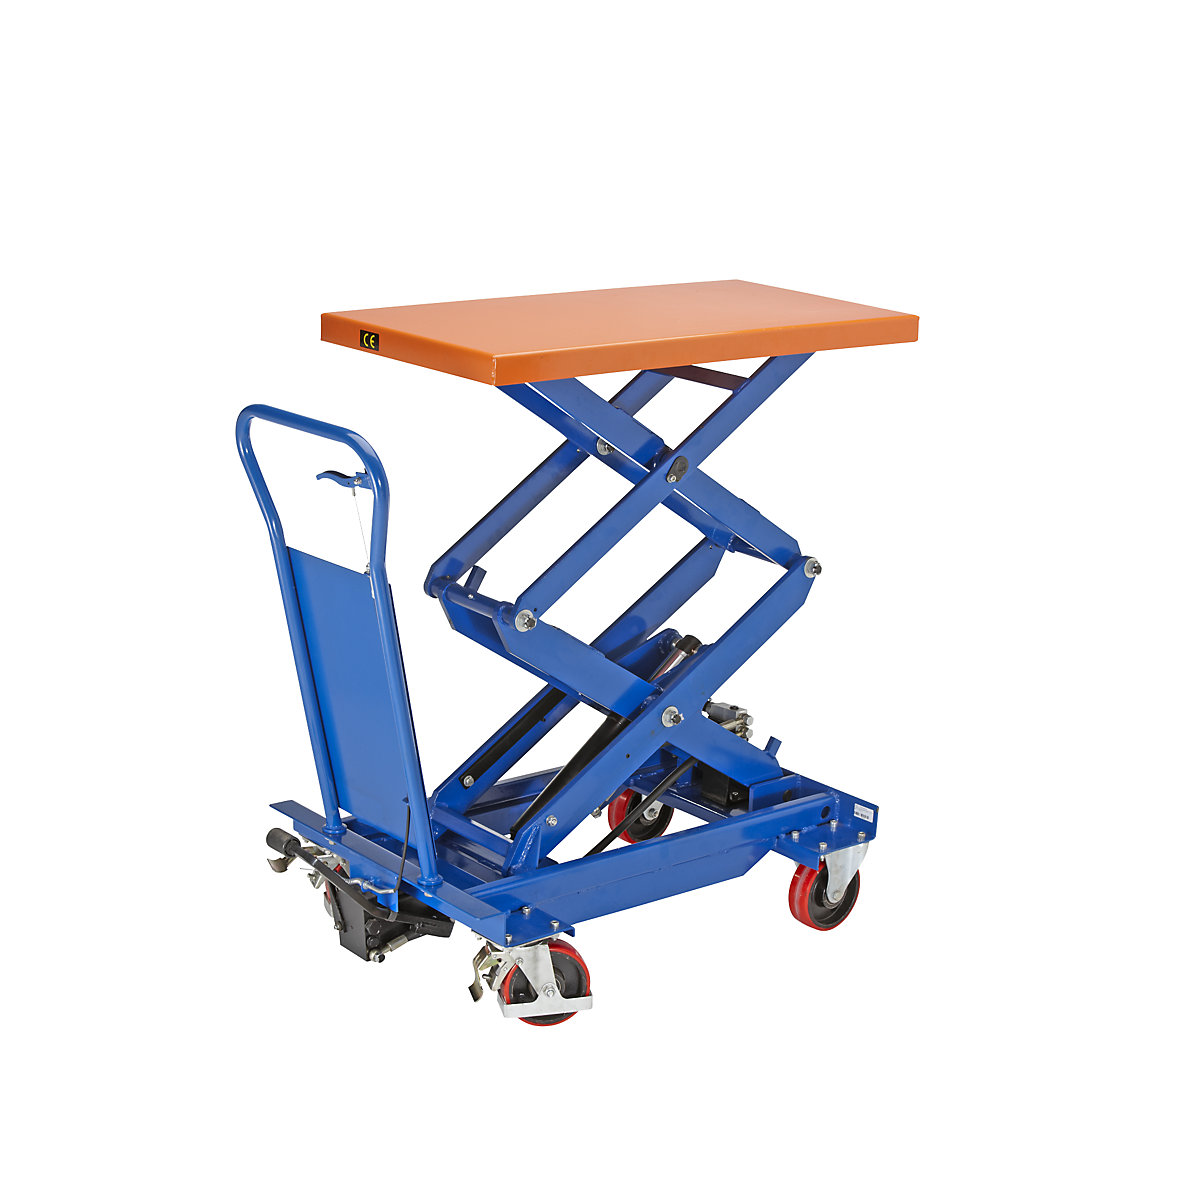 Lifting platform trolley with double scissors